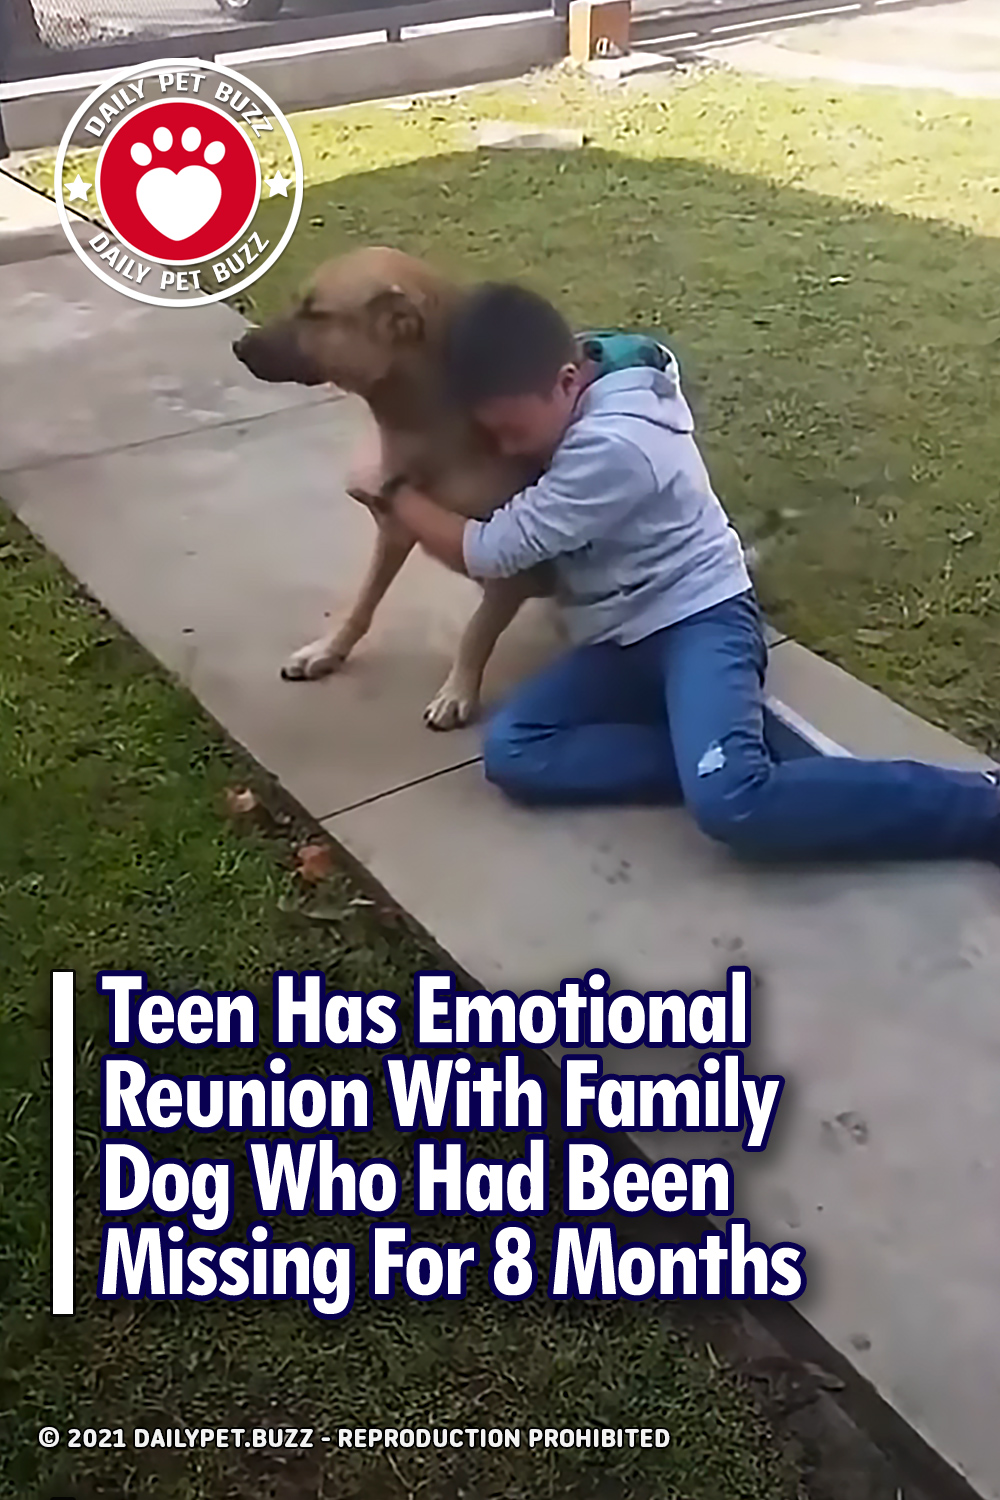 Teen Has Emotional Reunion With Family Dog Who Had Been Missing For 8 Months